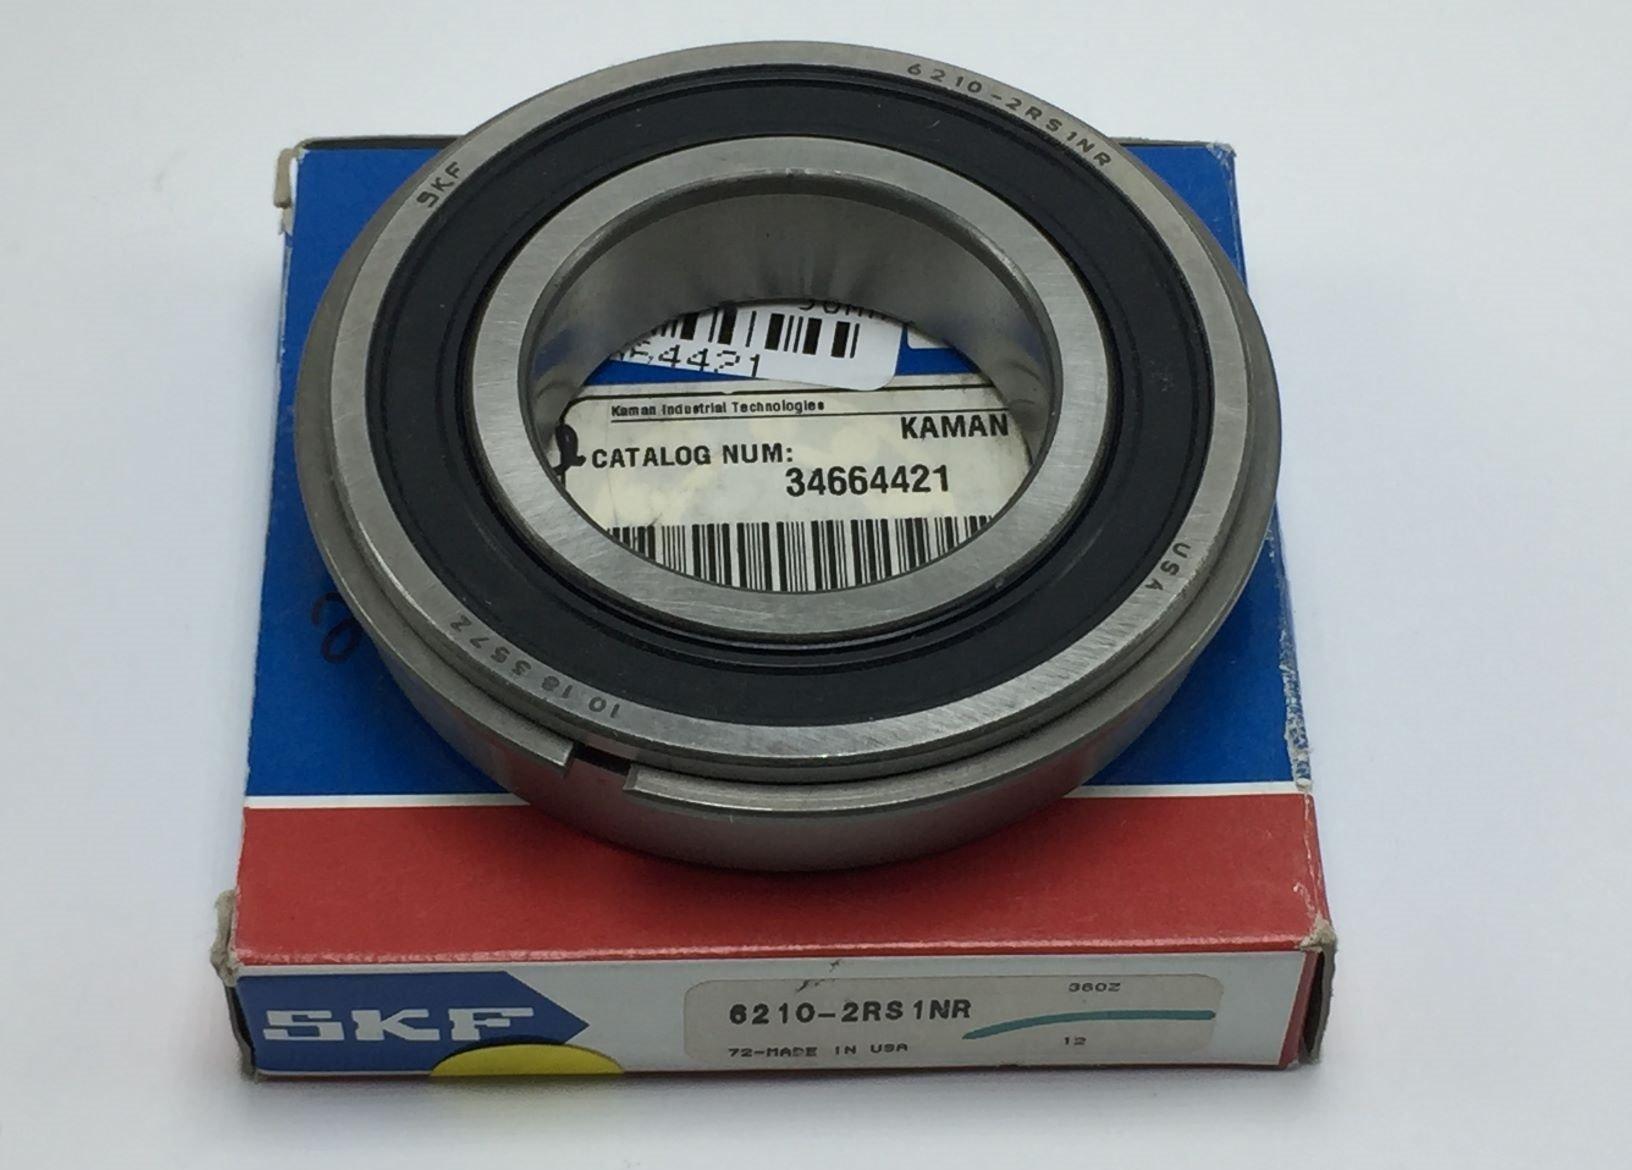 NEW SKF 6210-2RS1NR RADIAL/DEEP GROOVE BALL BEARING BORE 50MM DOUBLE SEALED 